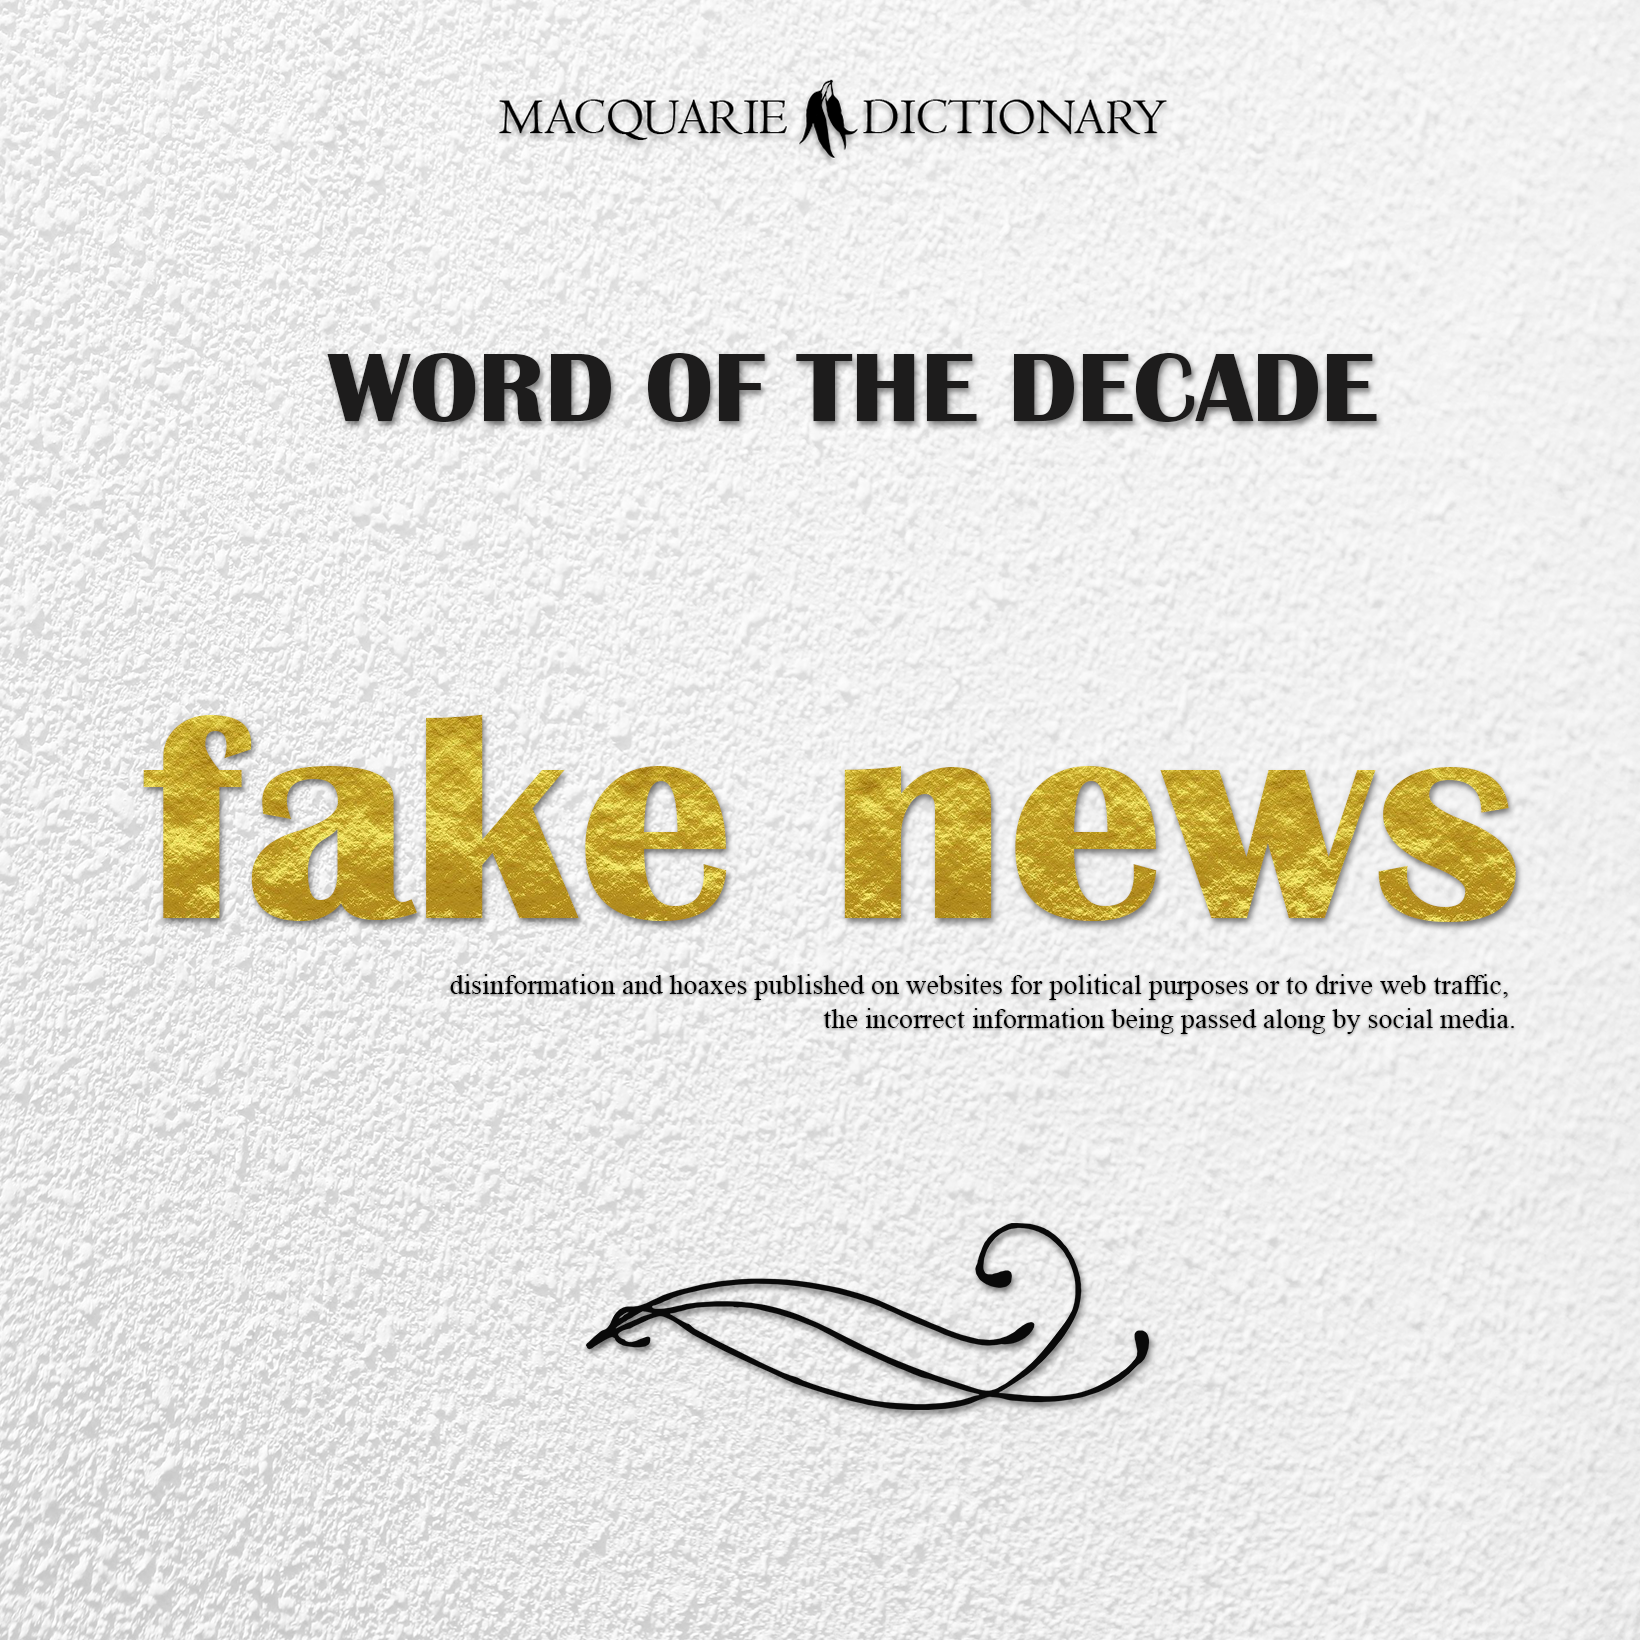 fake news - disinformation and hoaxes published on websites for political purposes or to drive web traffic, the incorrect information being passed along by social media.